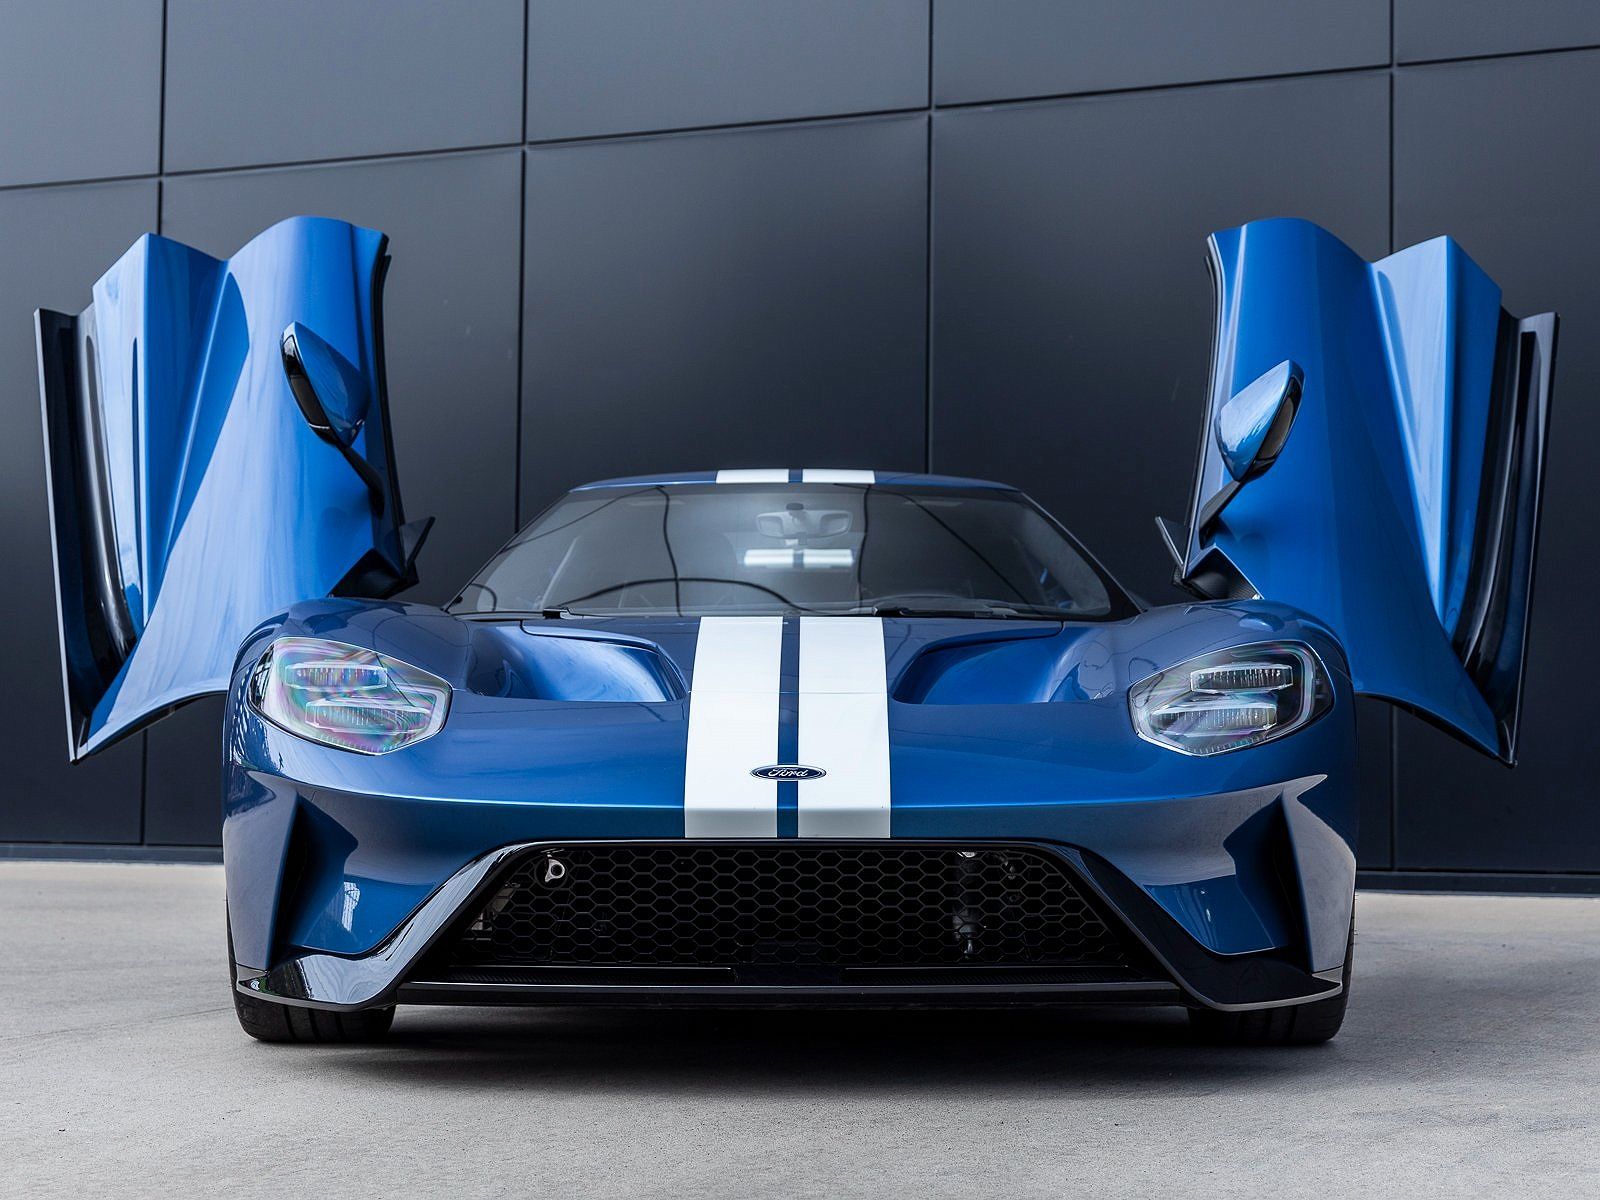 2020 Ford GT null image 5